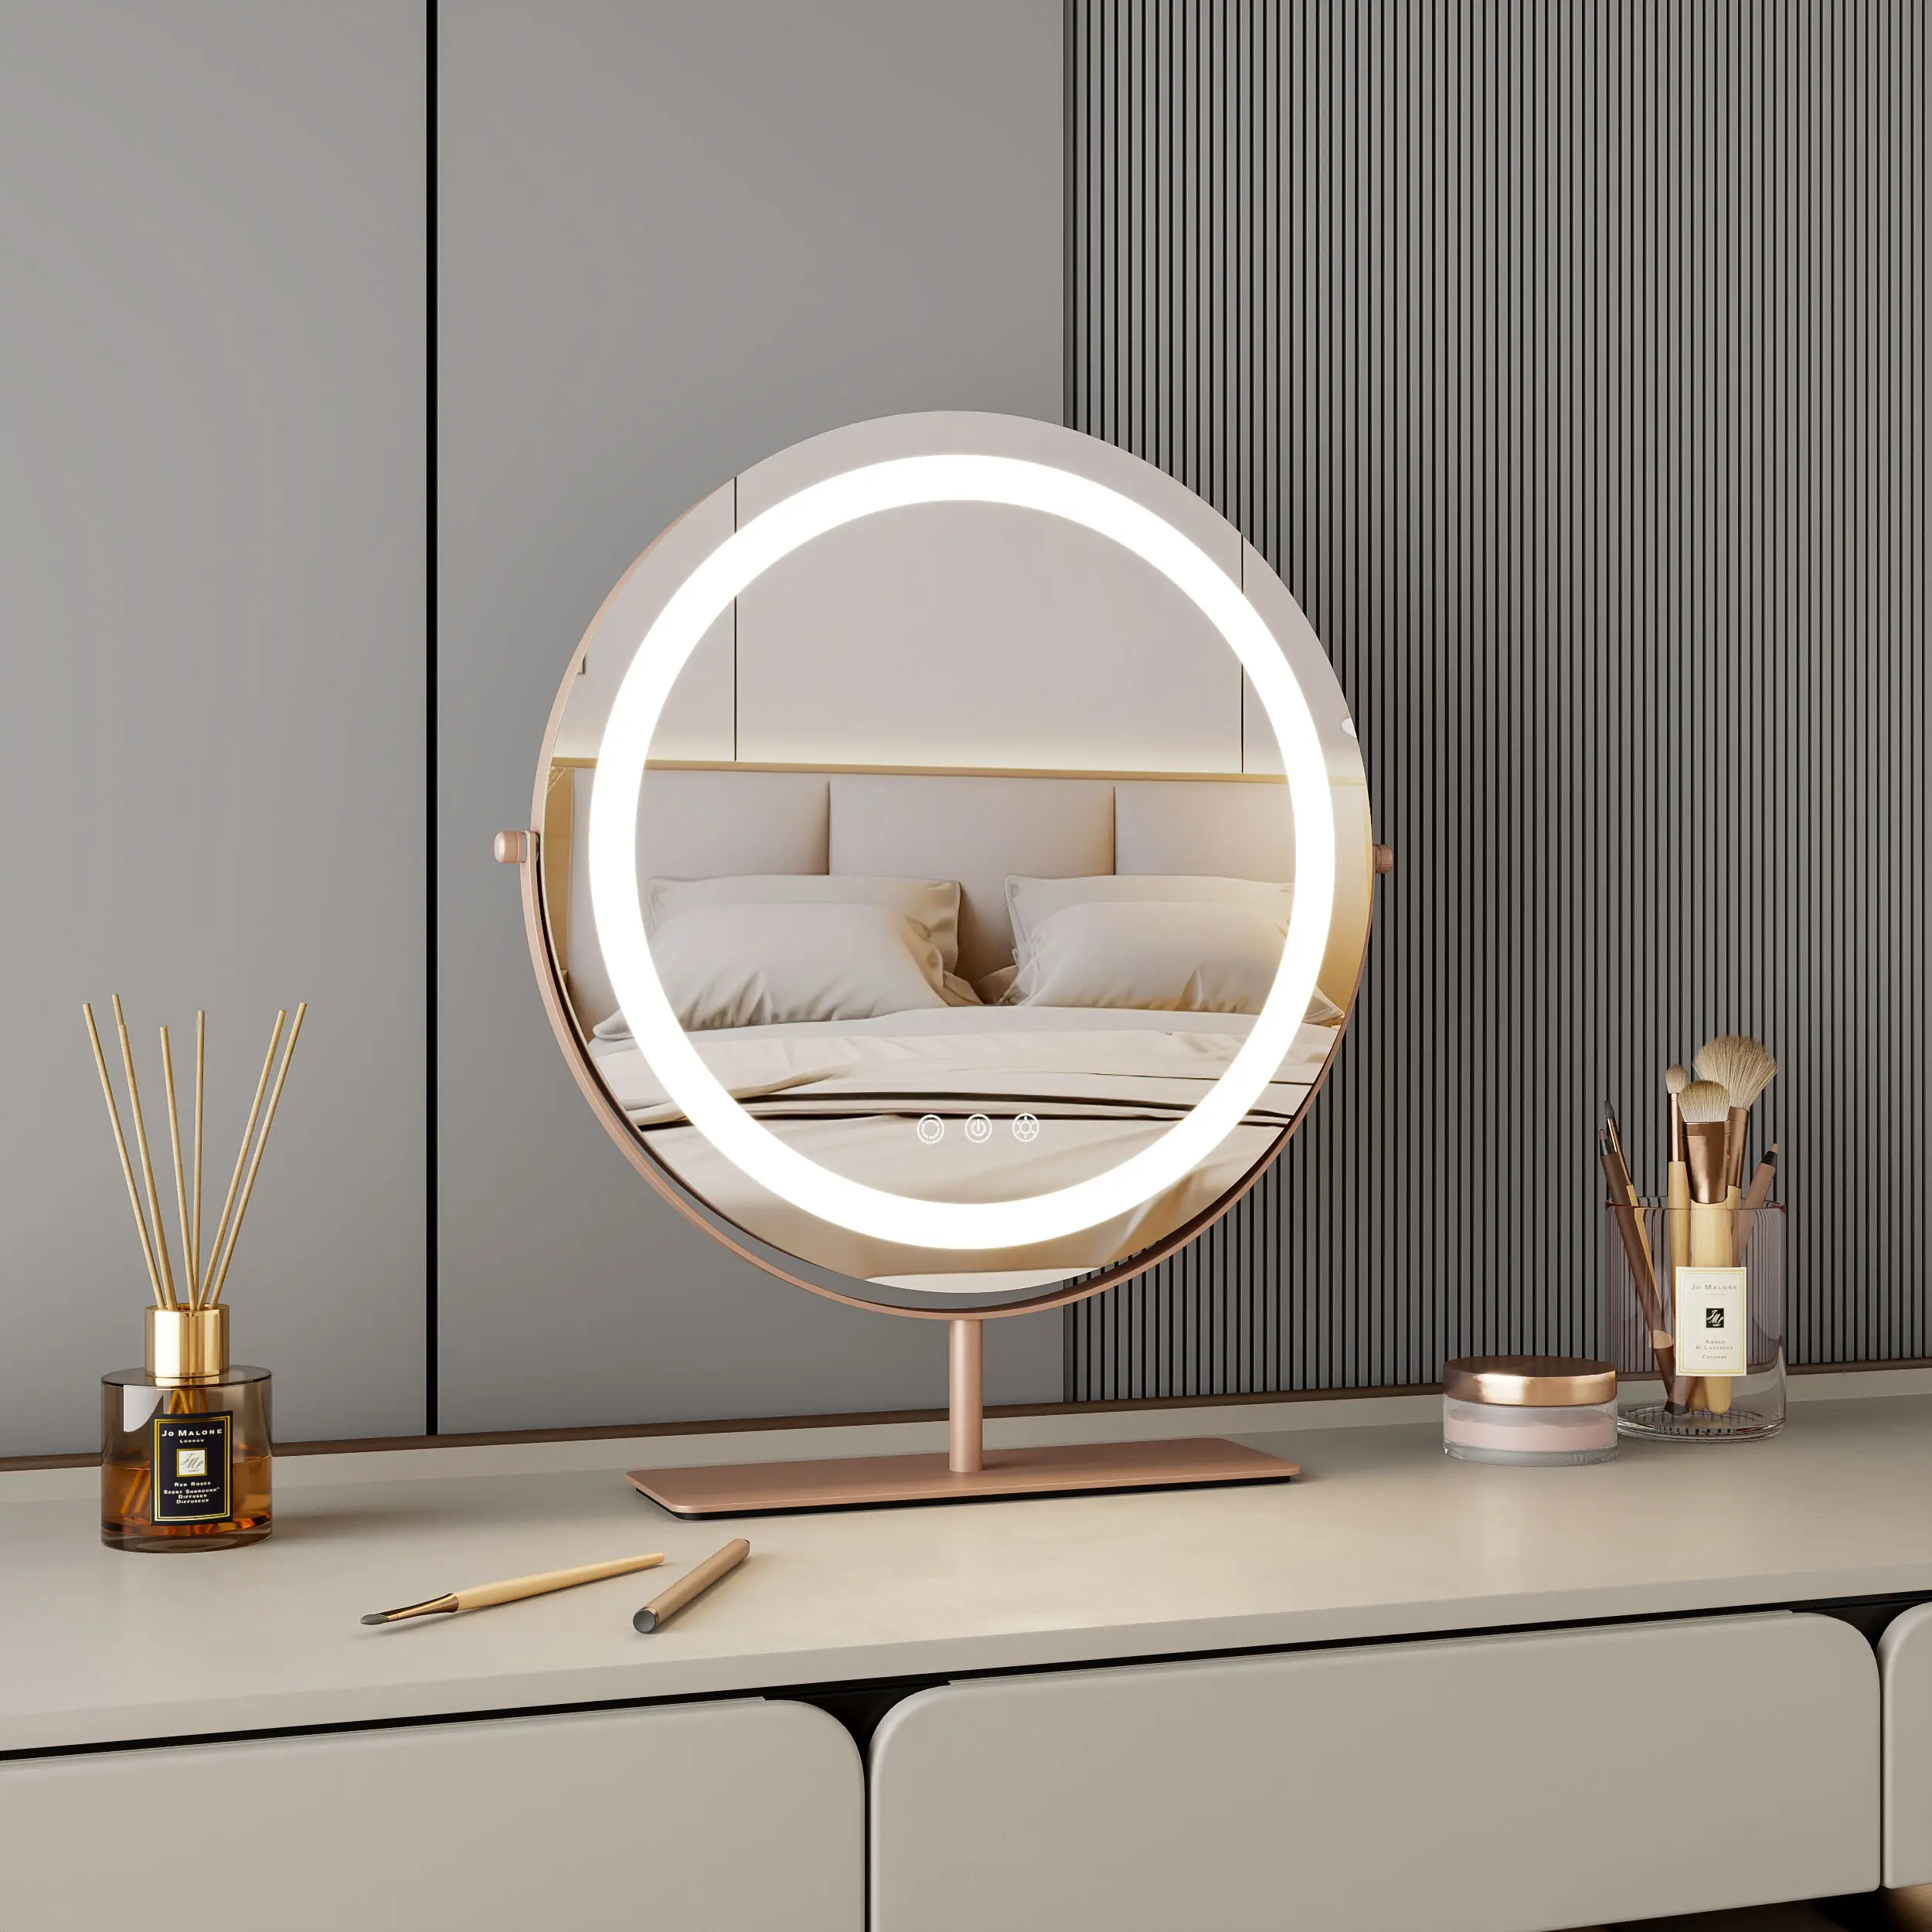 Rose Gold Portable High Quality 12v Adapter Round Cosmetic Table Desktop Makeup Vanity Mirror With Led Lights Make Up Mirror